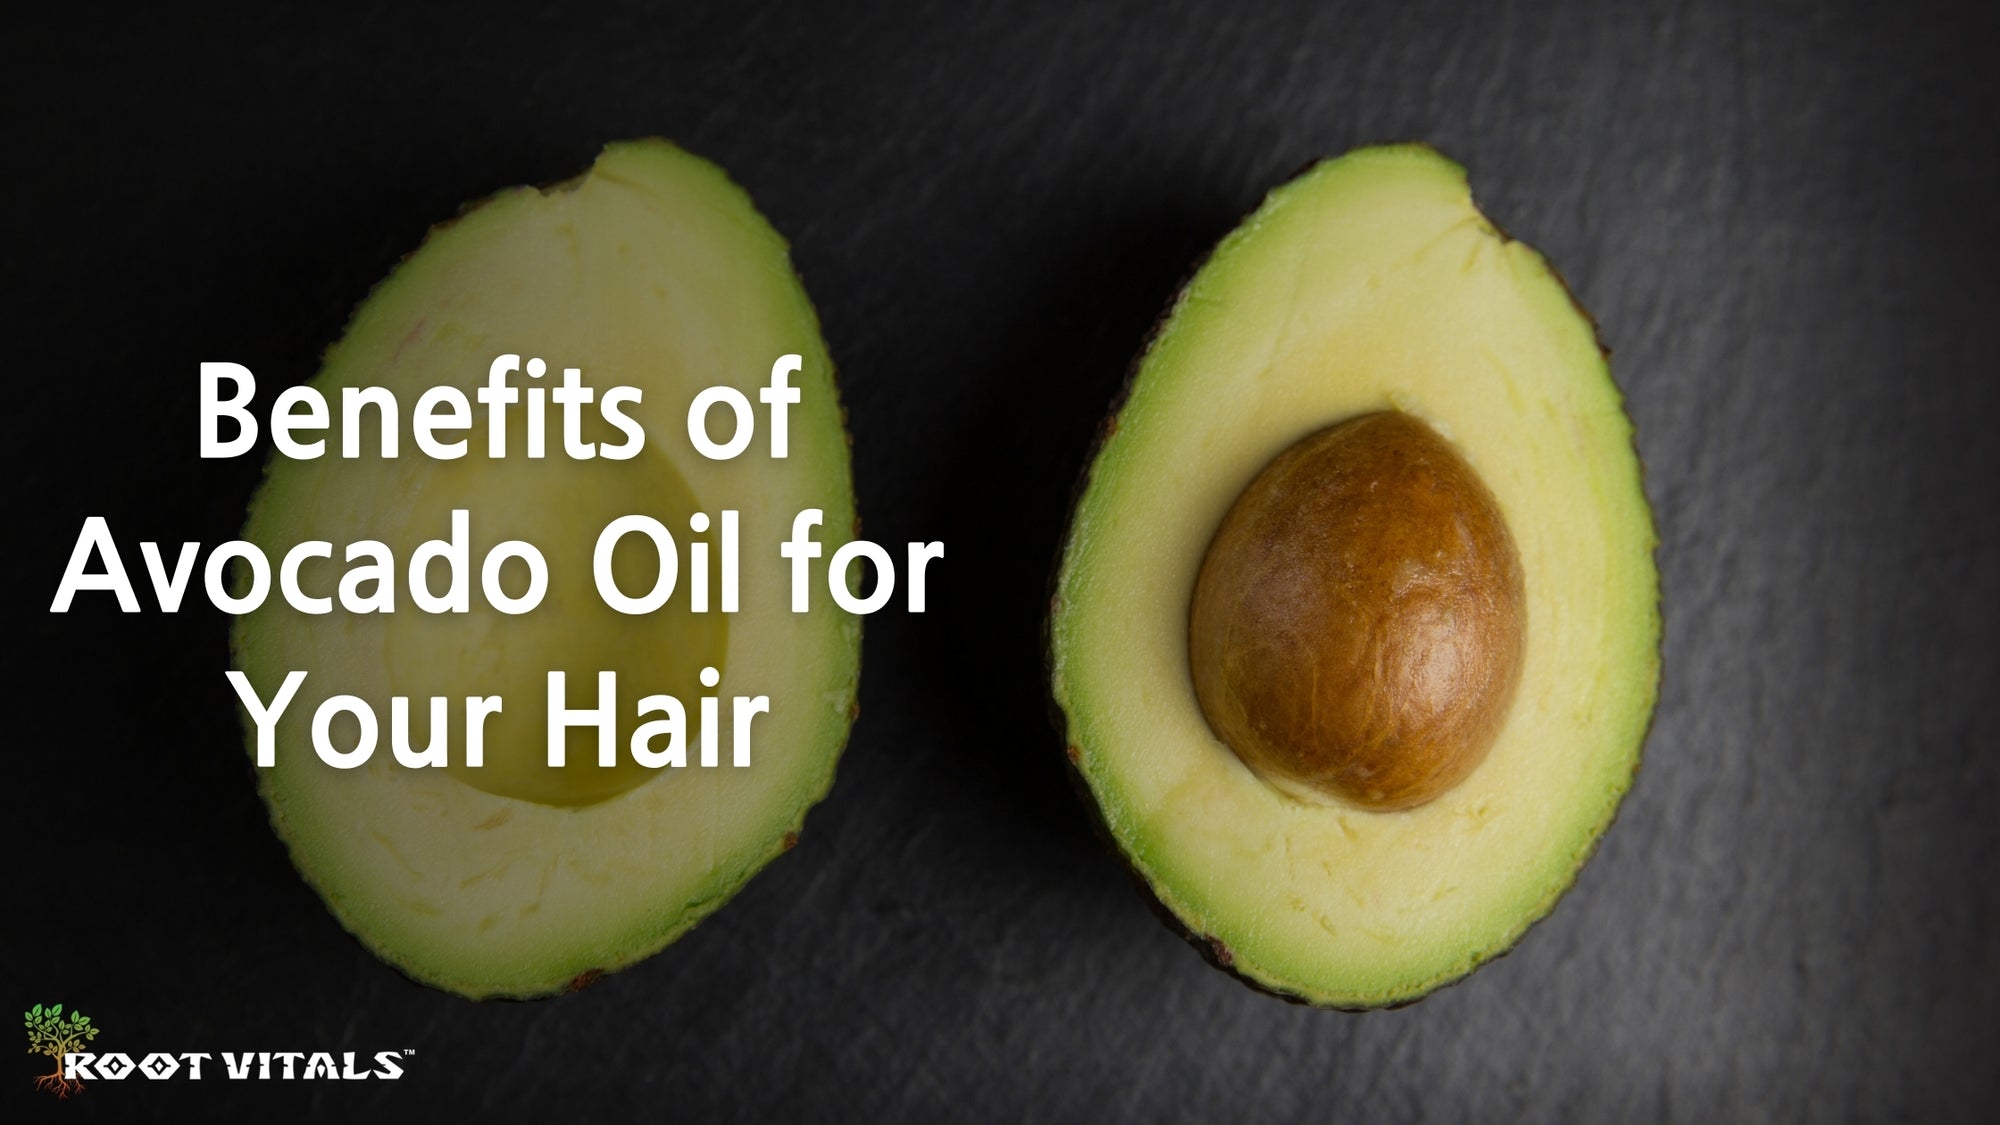 Important Benefits of Avocado Oil for Hair used as all natural hair products